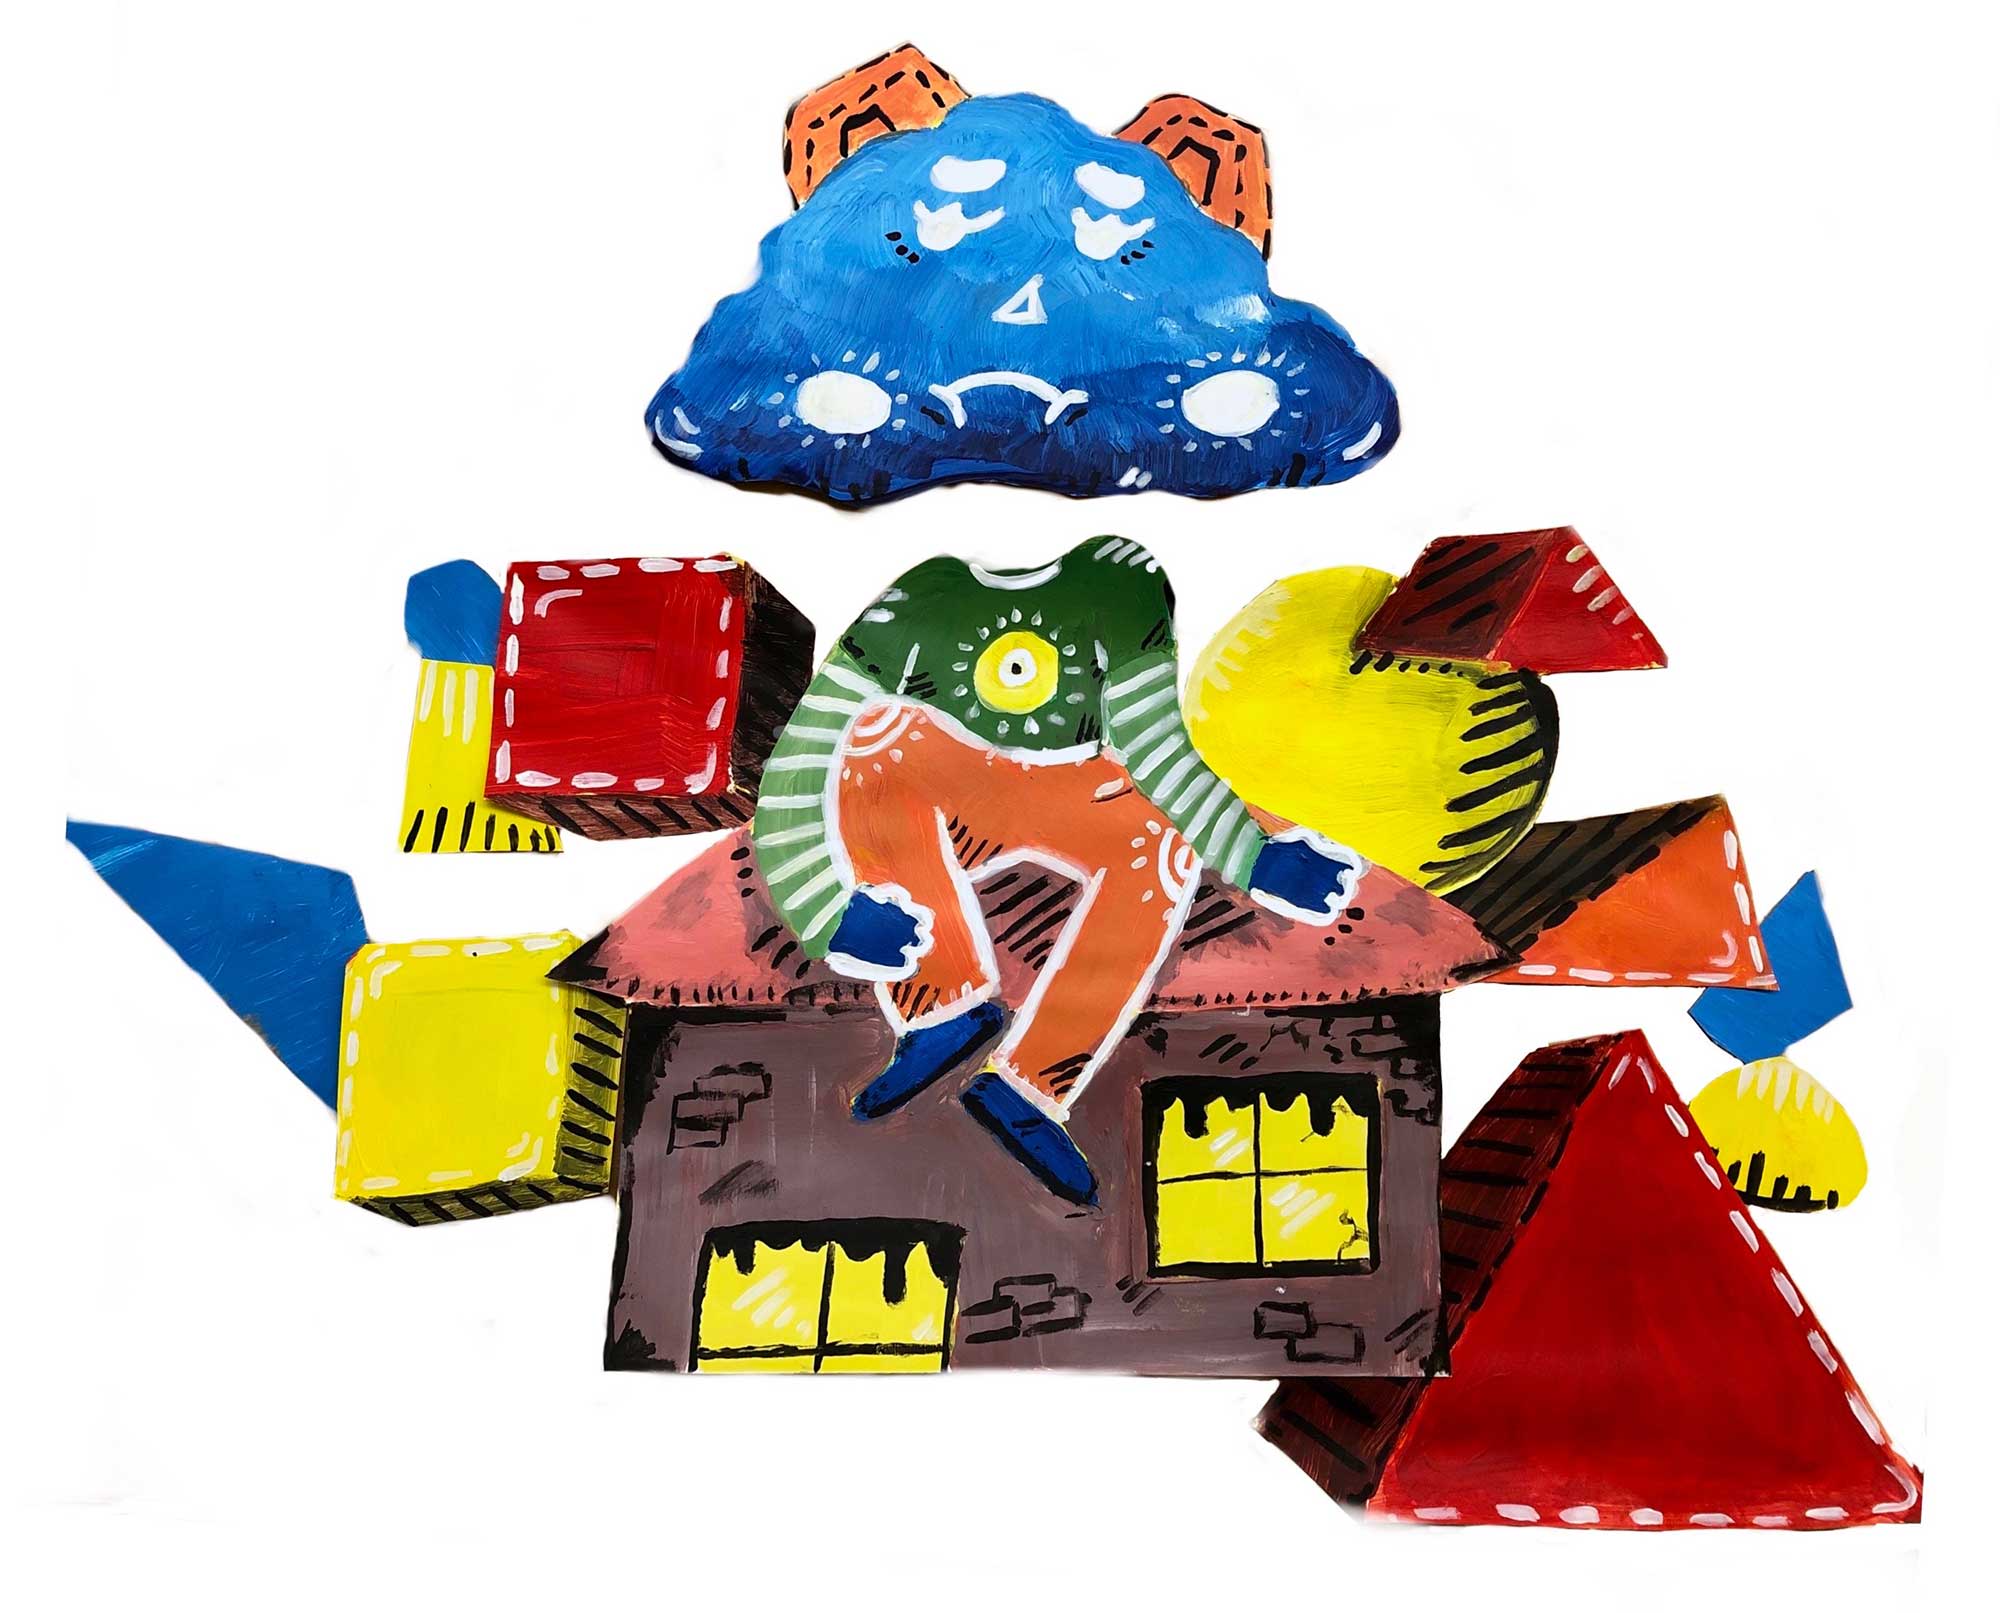 CLoud Man Sitting on a house surrounded by 3D blocks and triangles